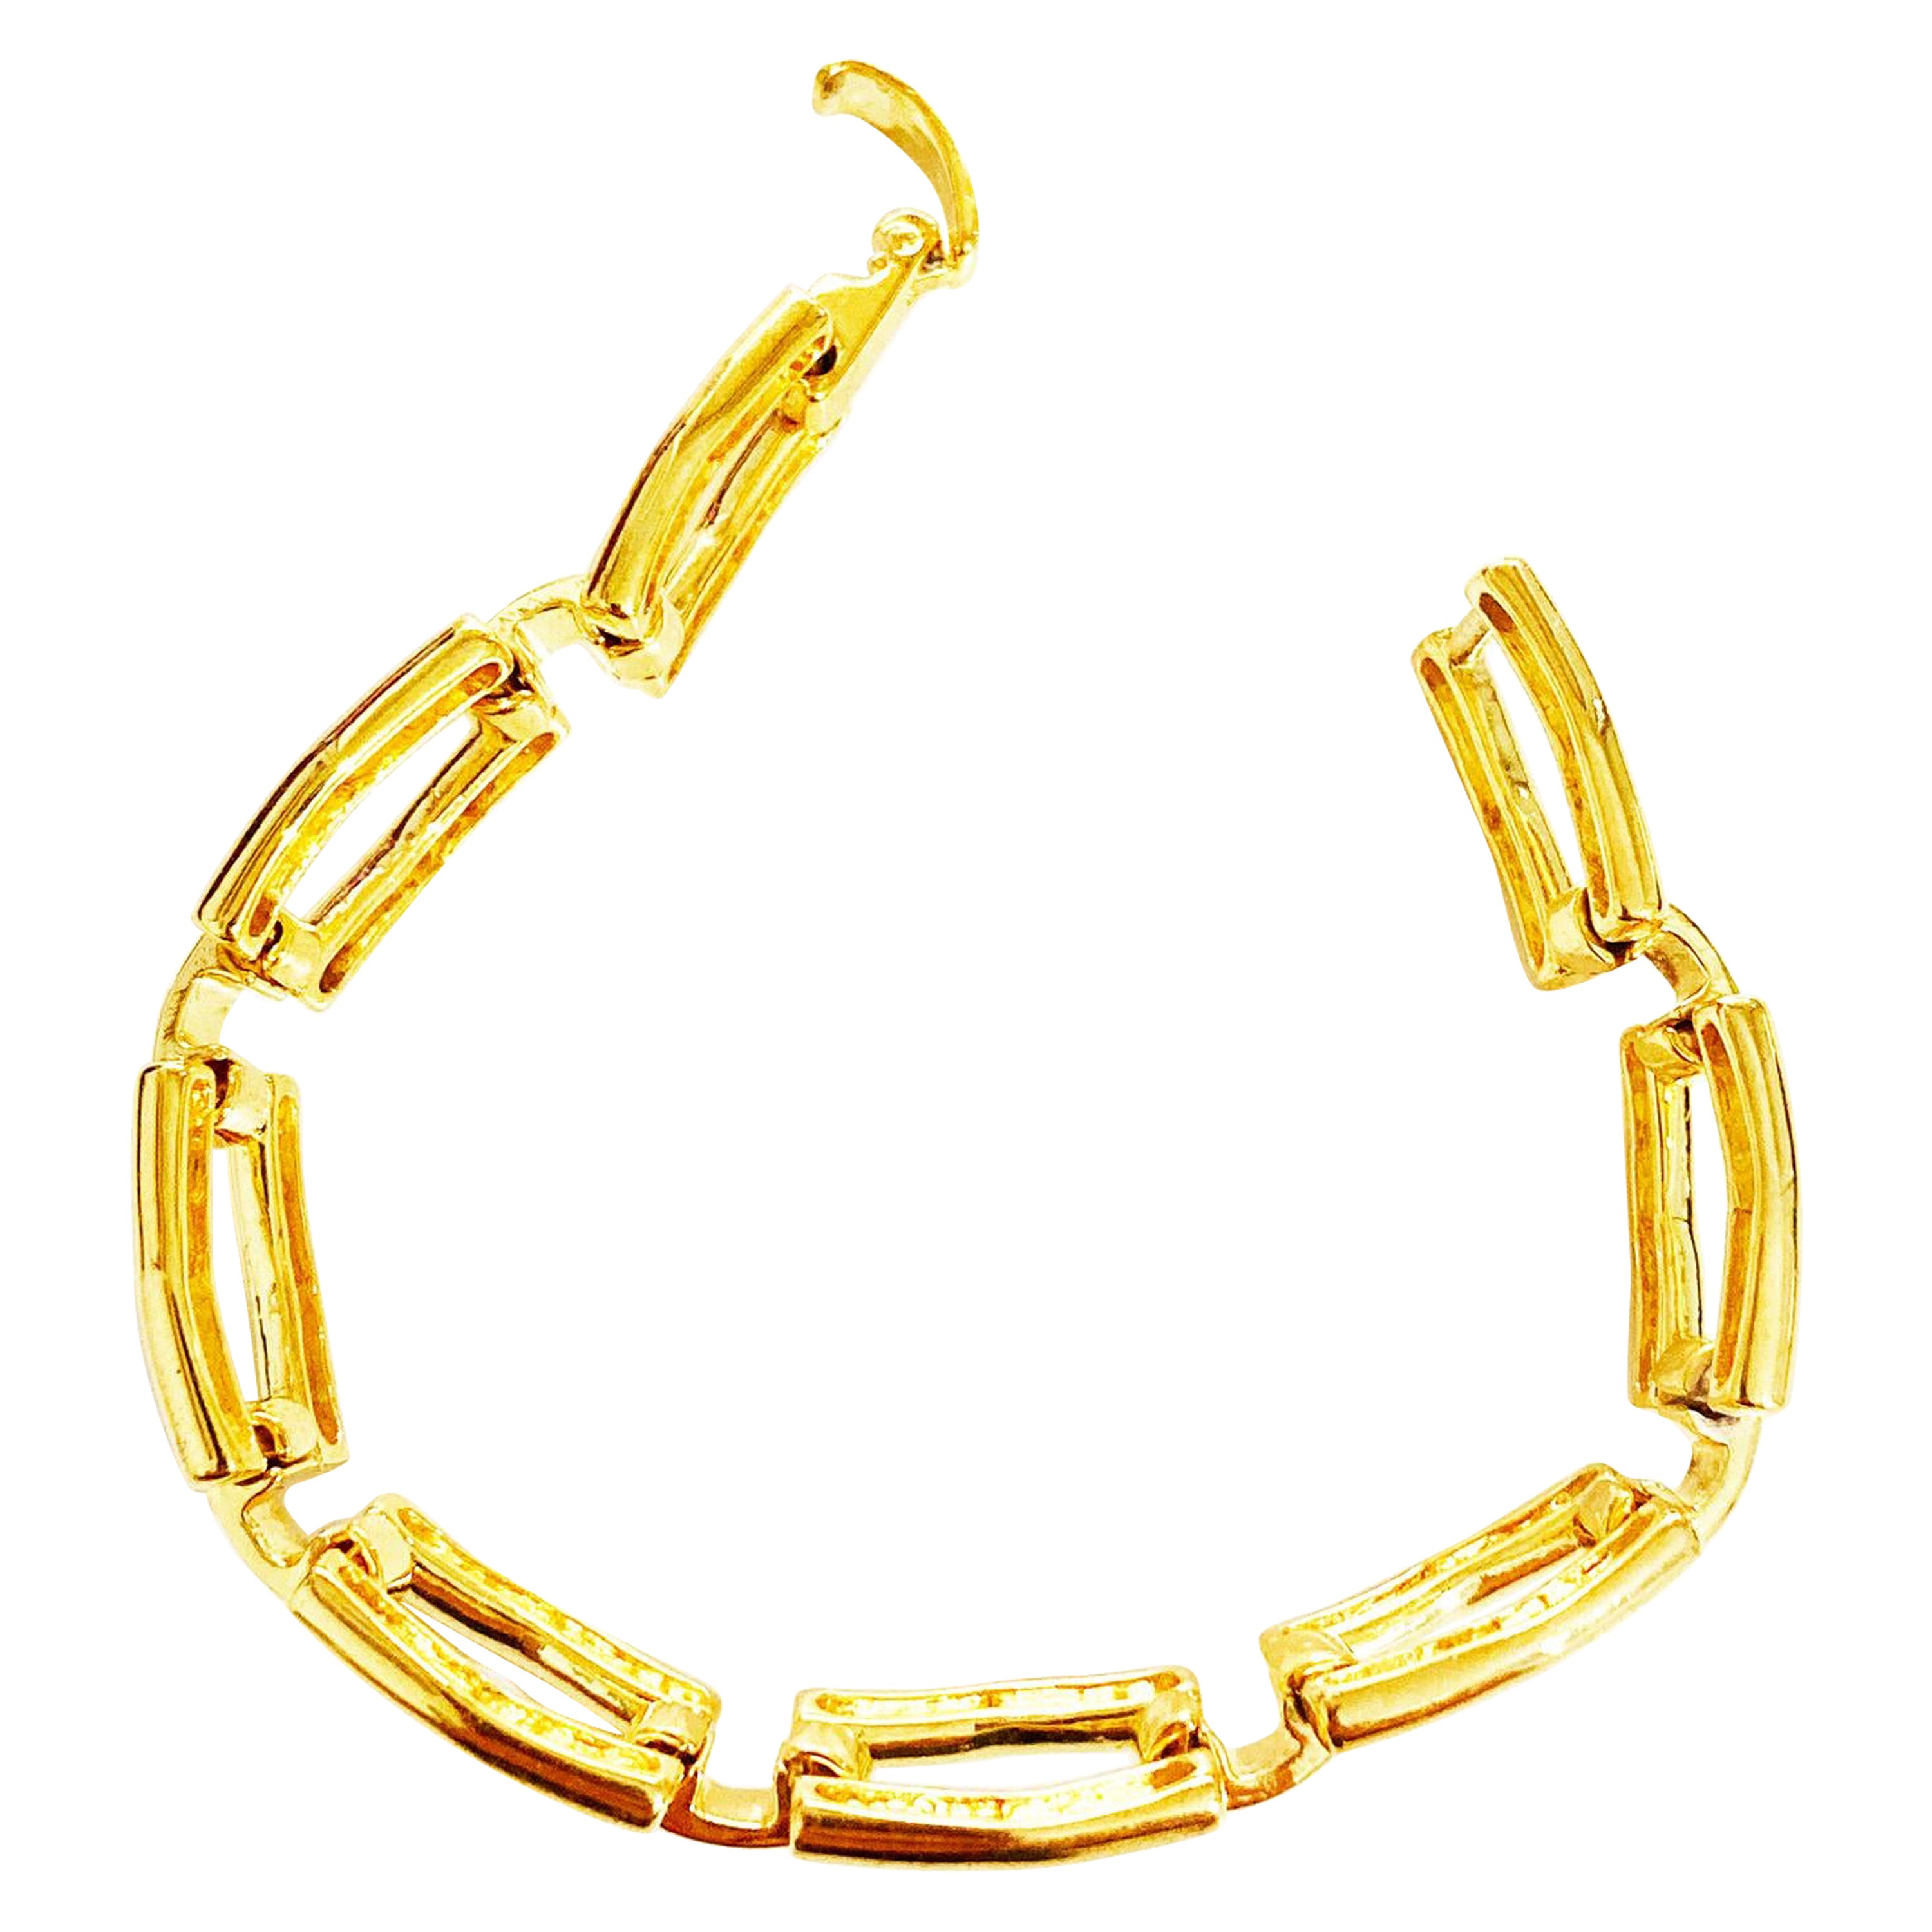 Rossella Ugolini 24K Yellow Gold Plated Unique Links Chain Bracelet